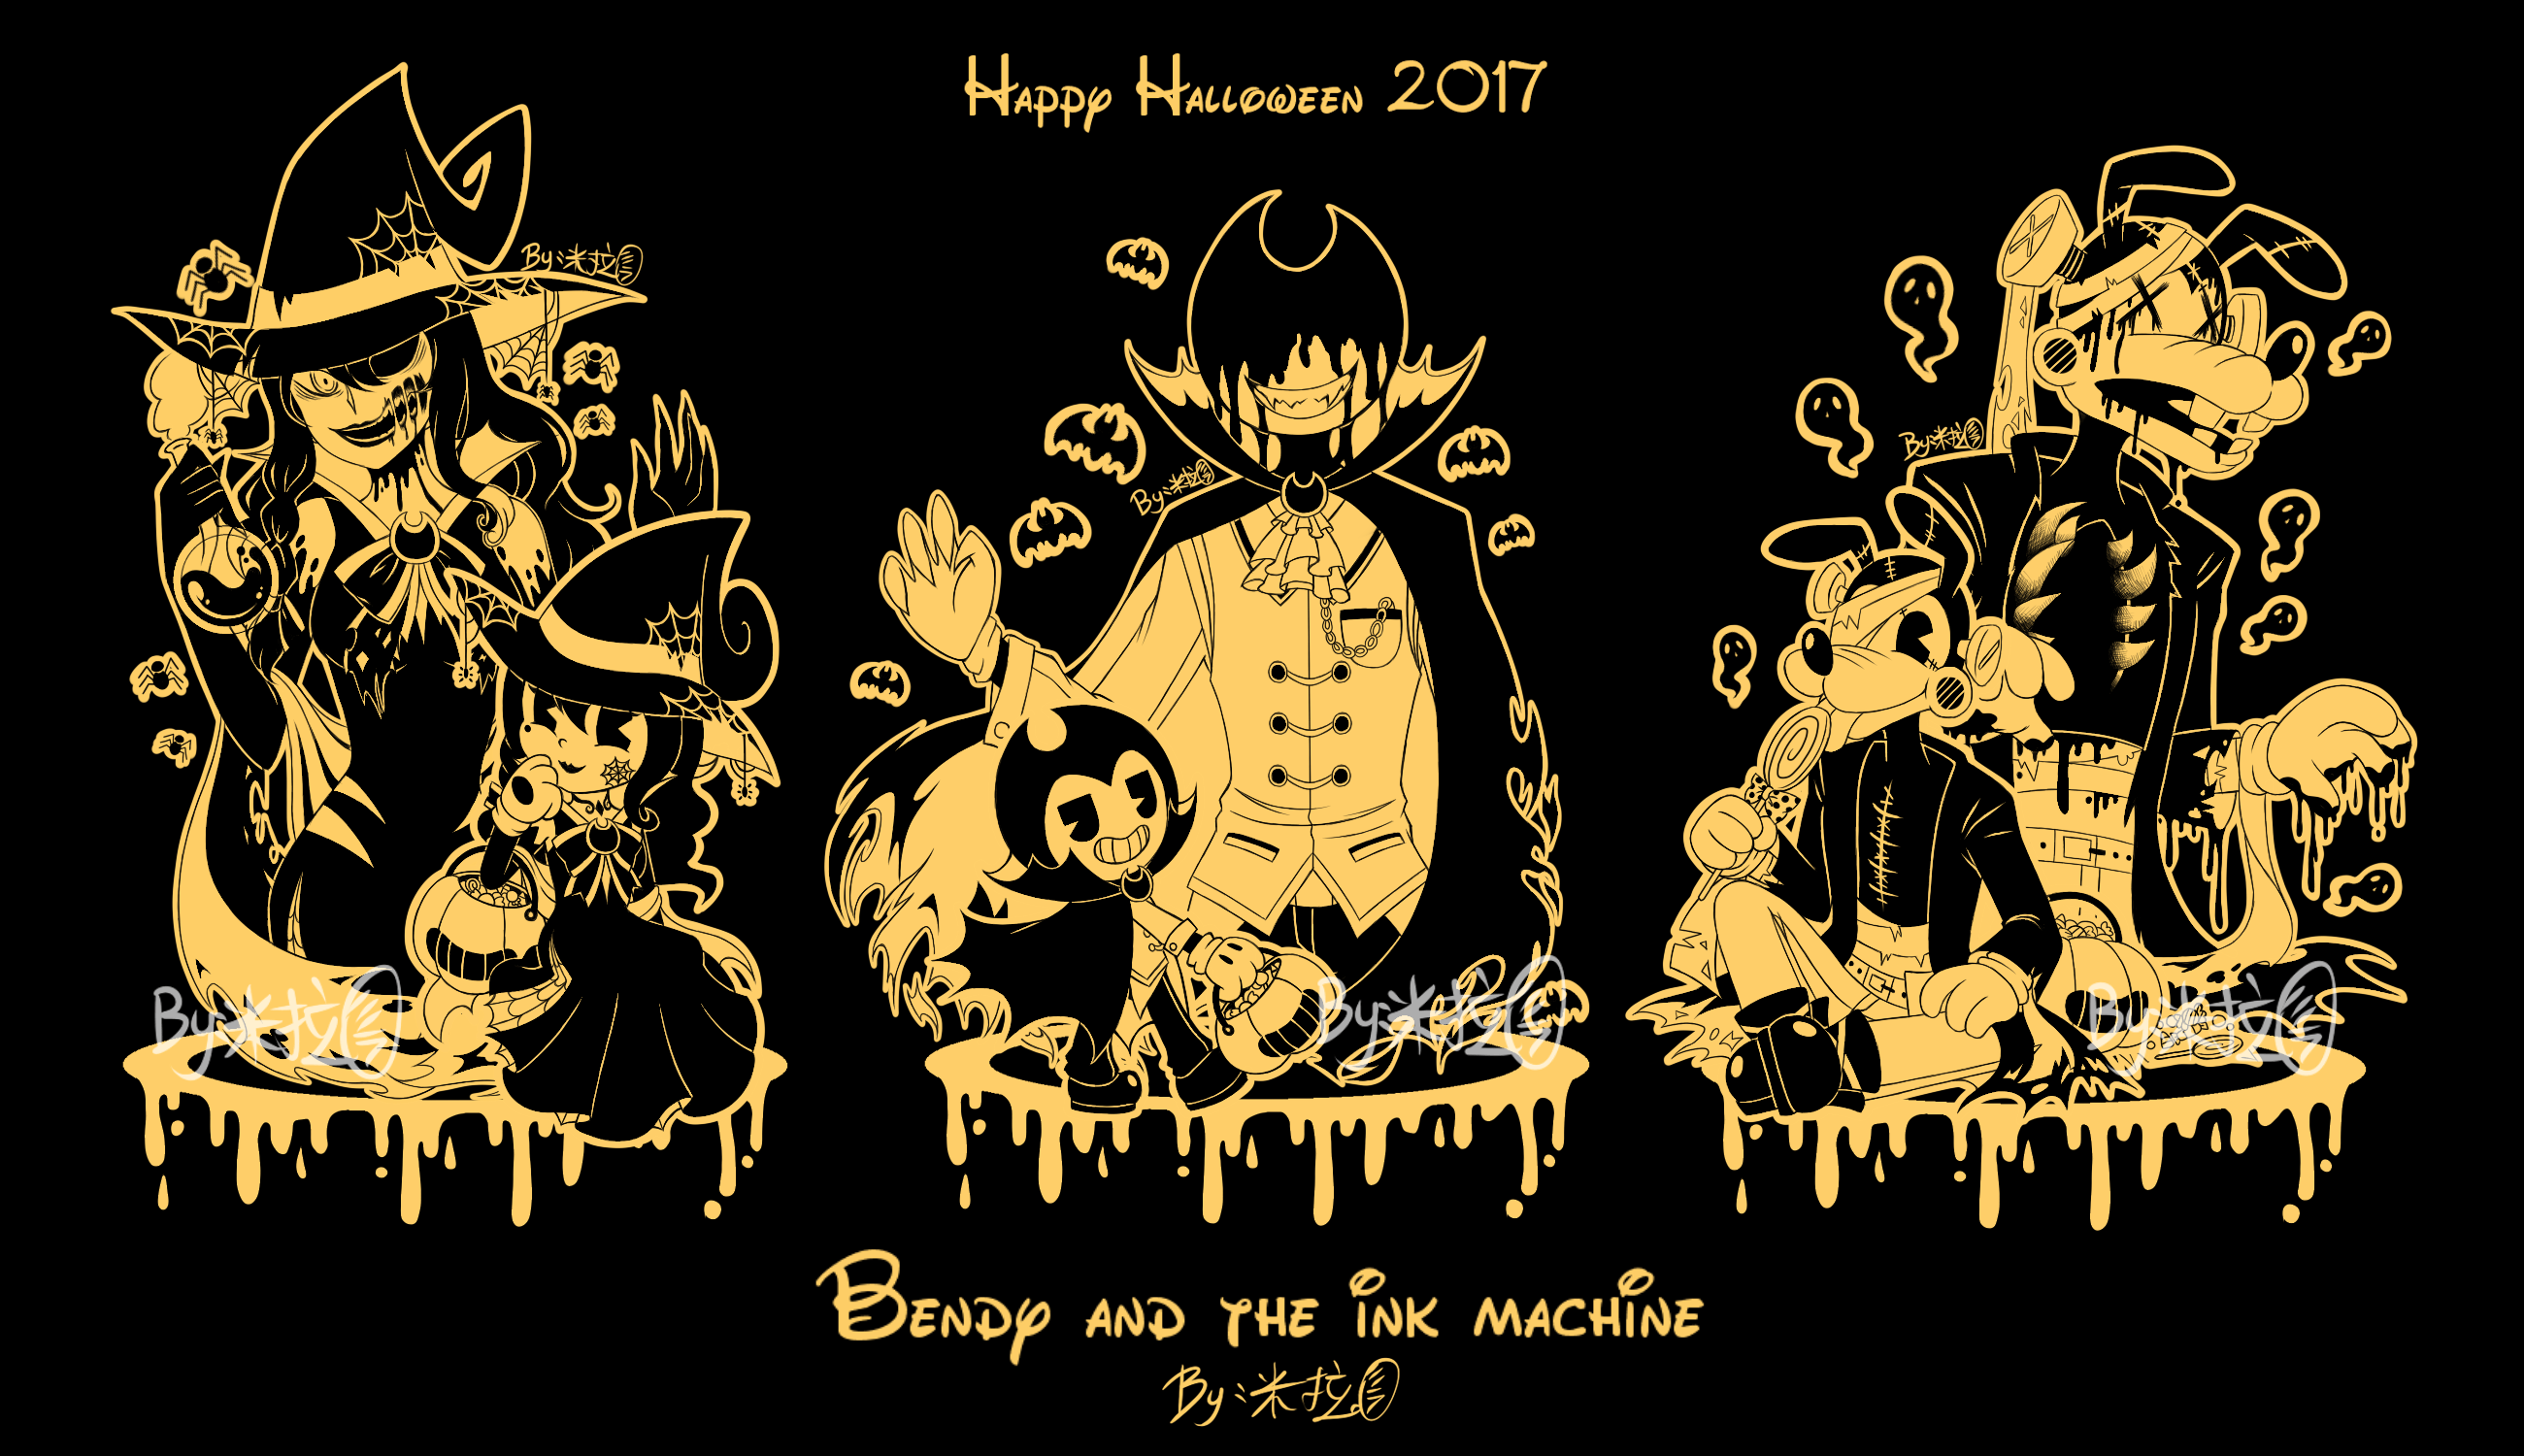 2600x1500 Bendy And The Ink Machine - Bendy And The Ink Machine